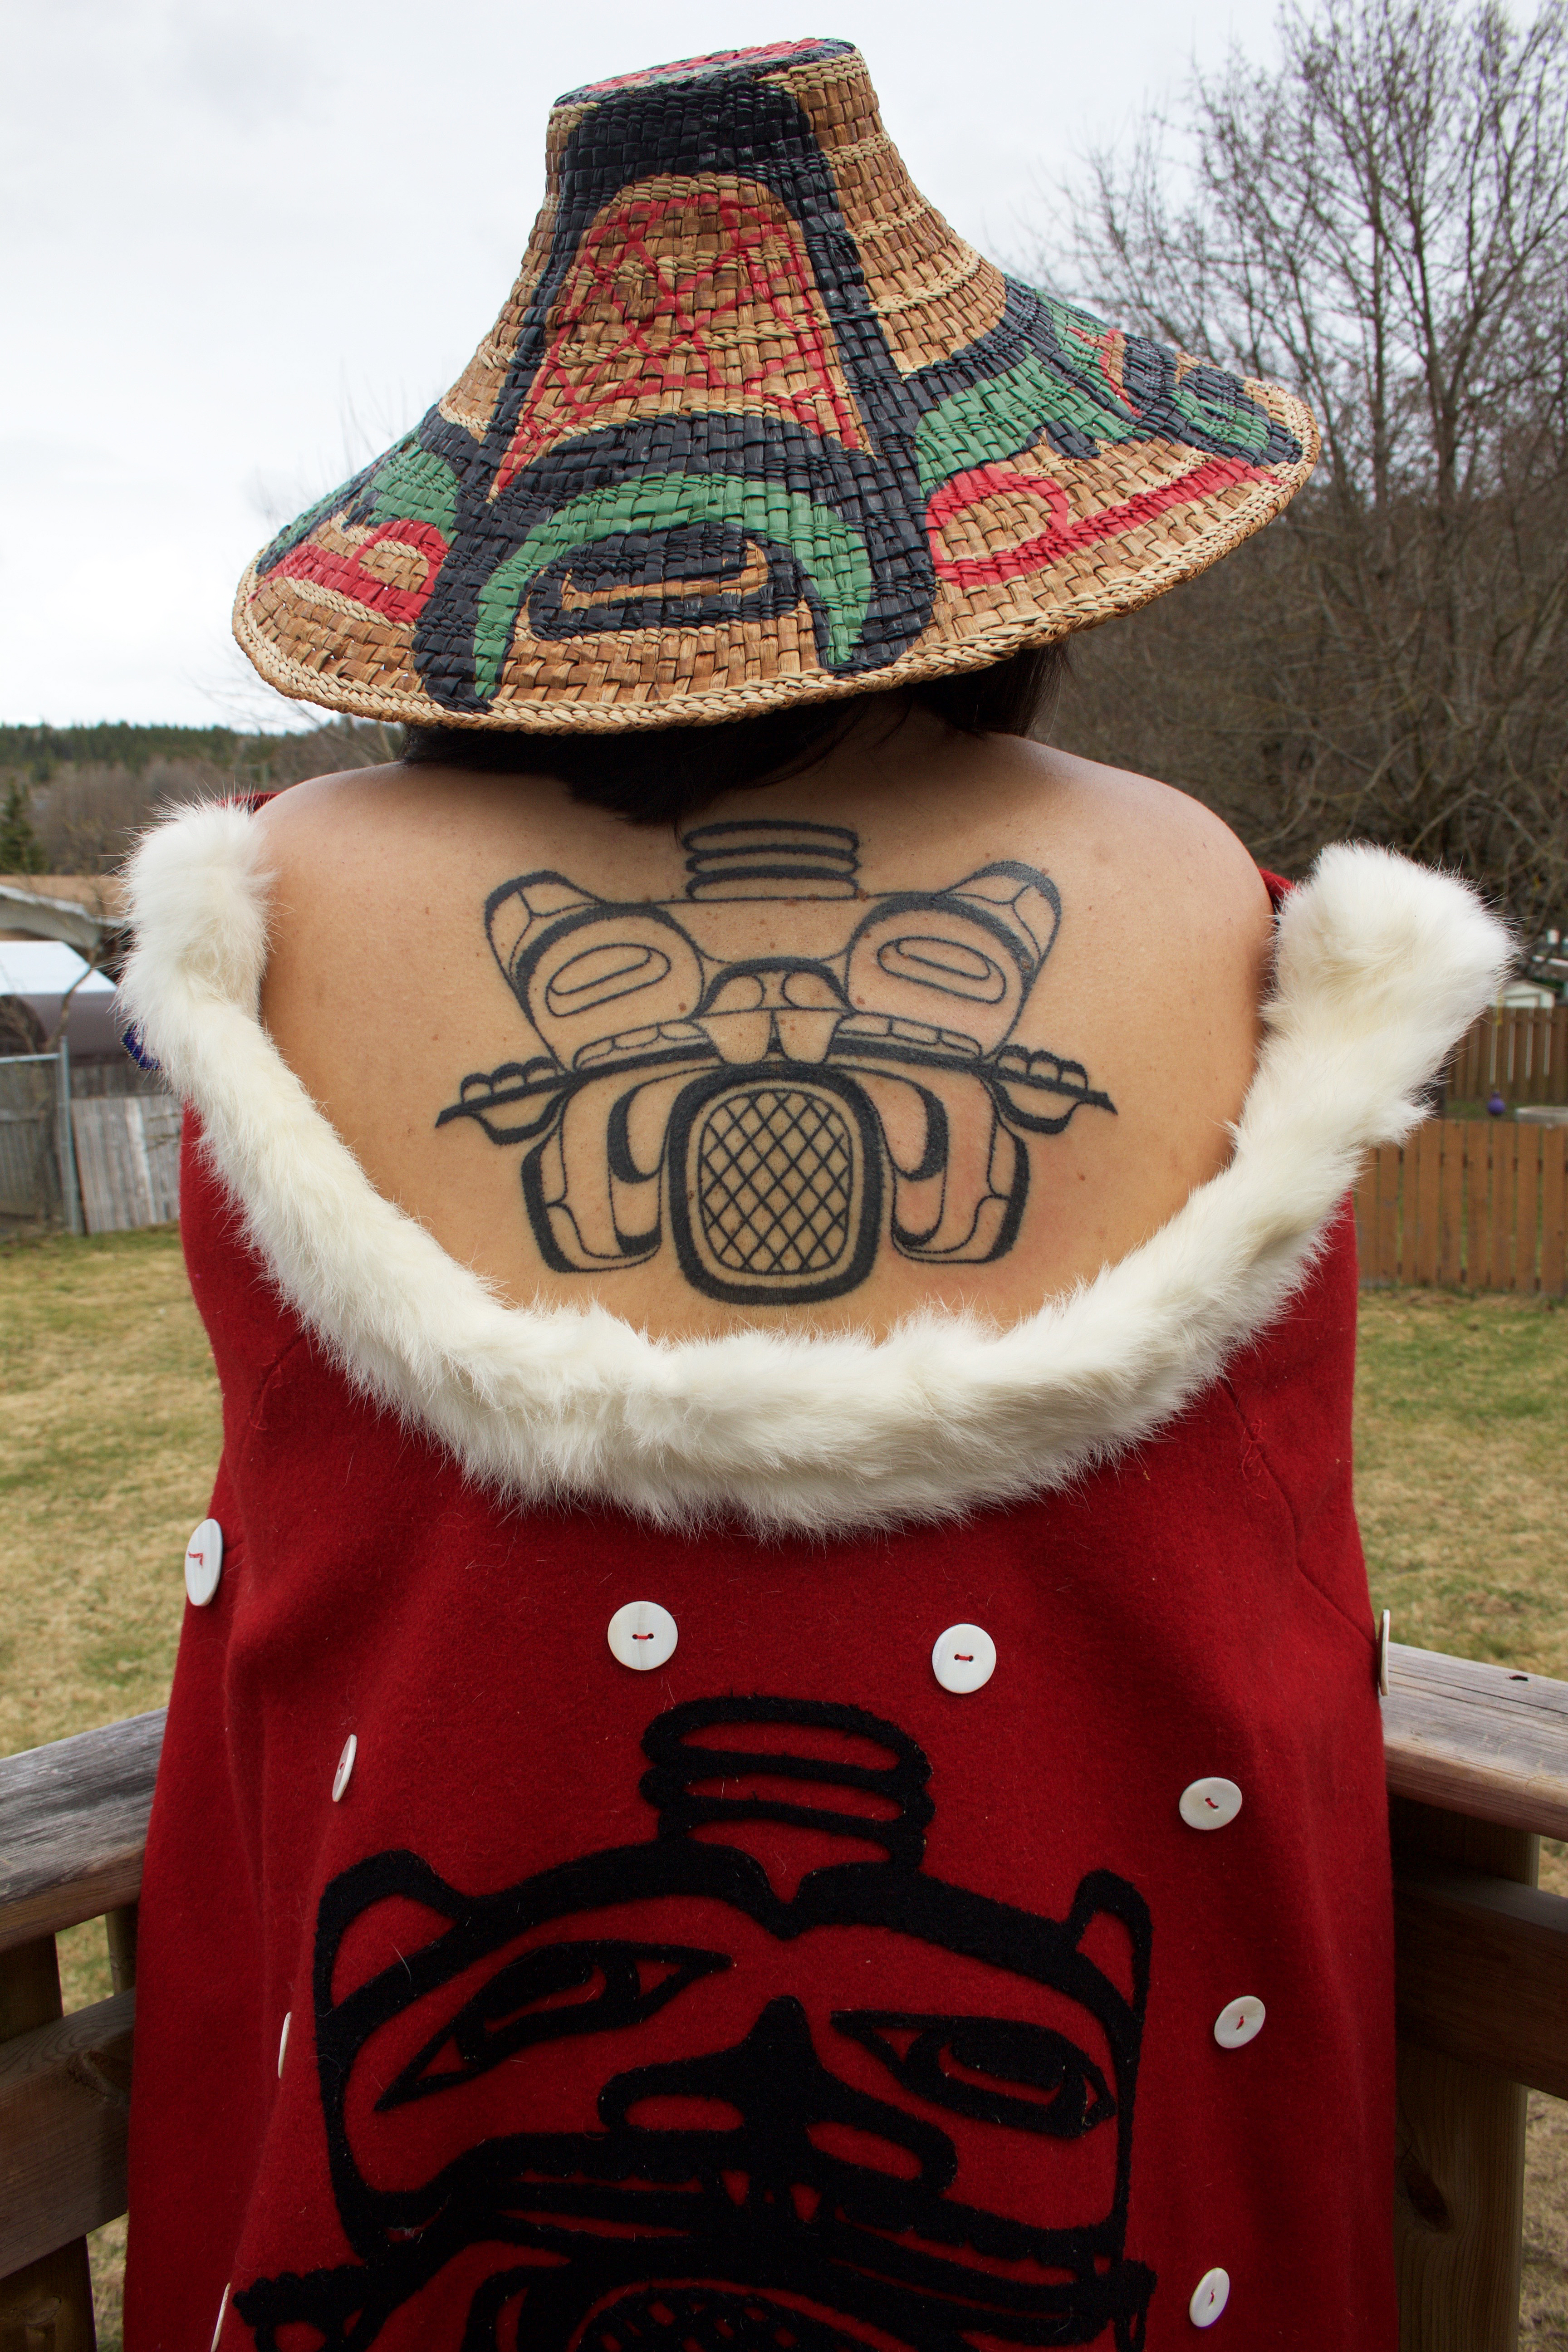 Person stands with back to camera, a tattoo depicted on her back. The same drawing is seen on something she is wearing around her as well. She is wearing a woven hat.